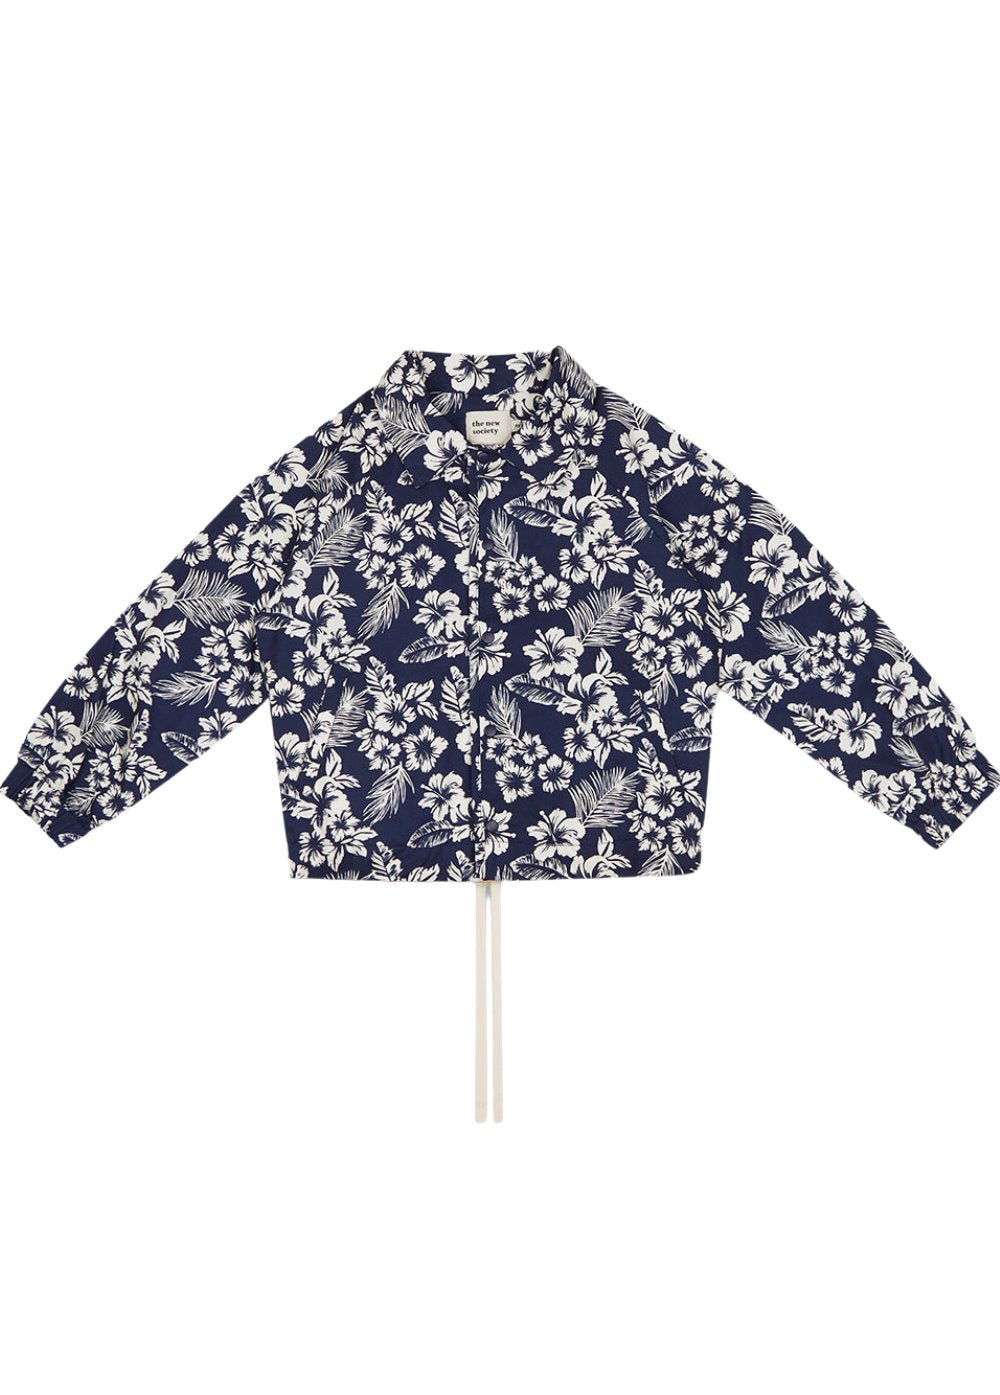 Hibiscus Boy Overshirt Print Outerwear The New Society 